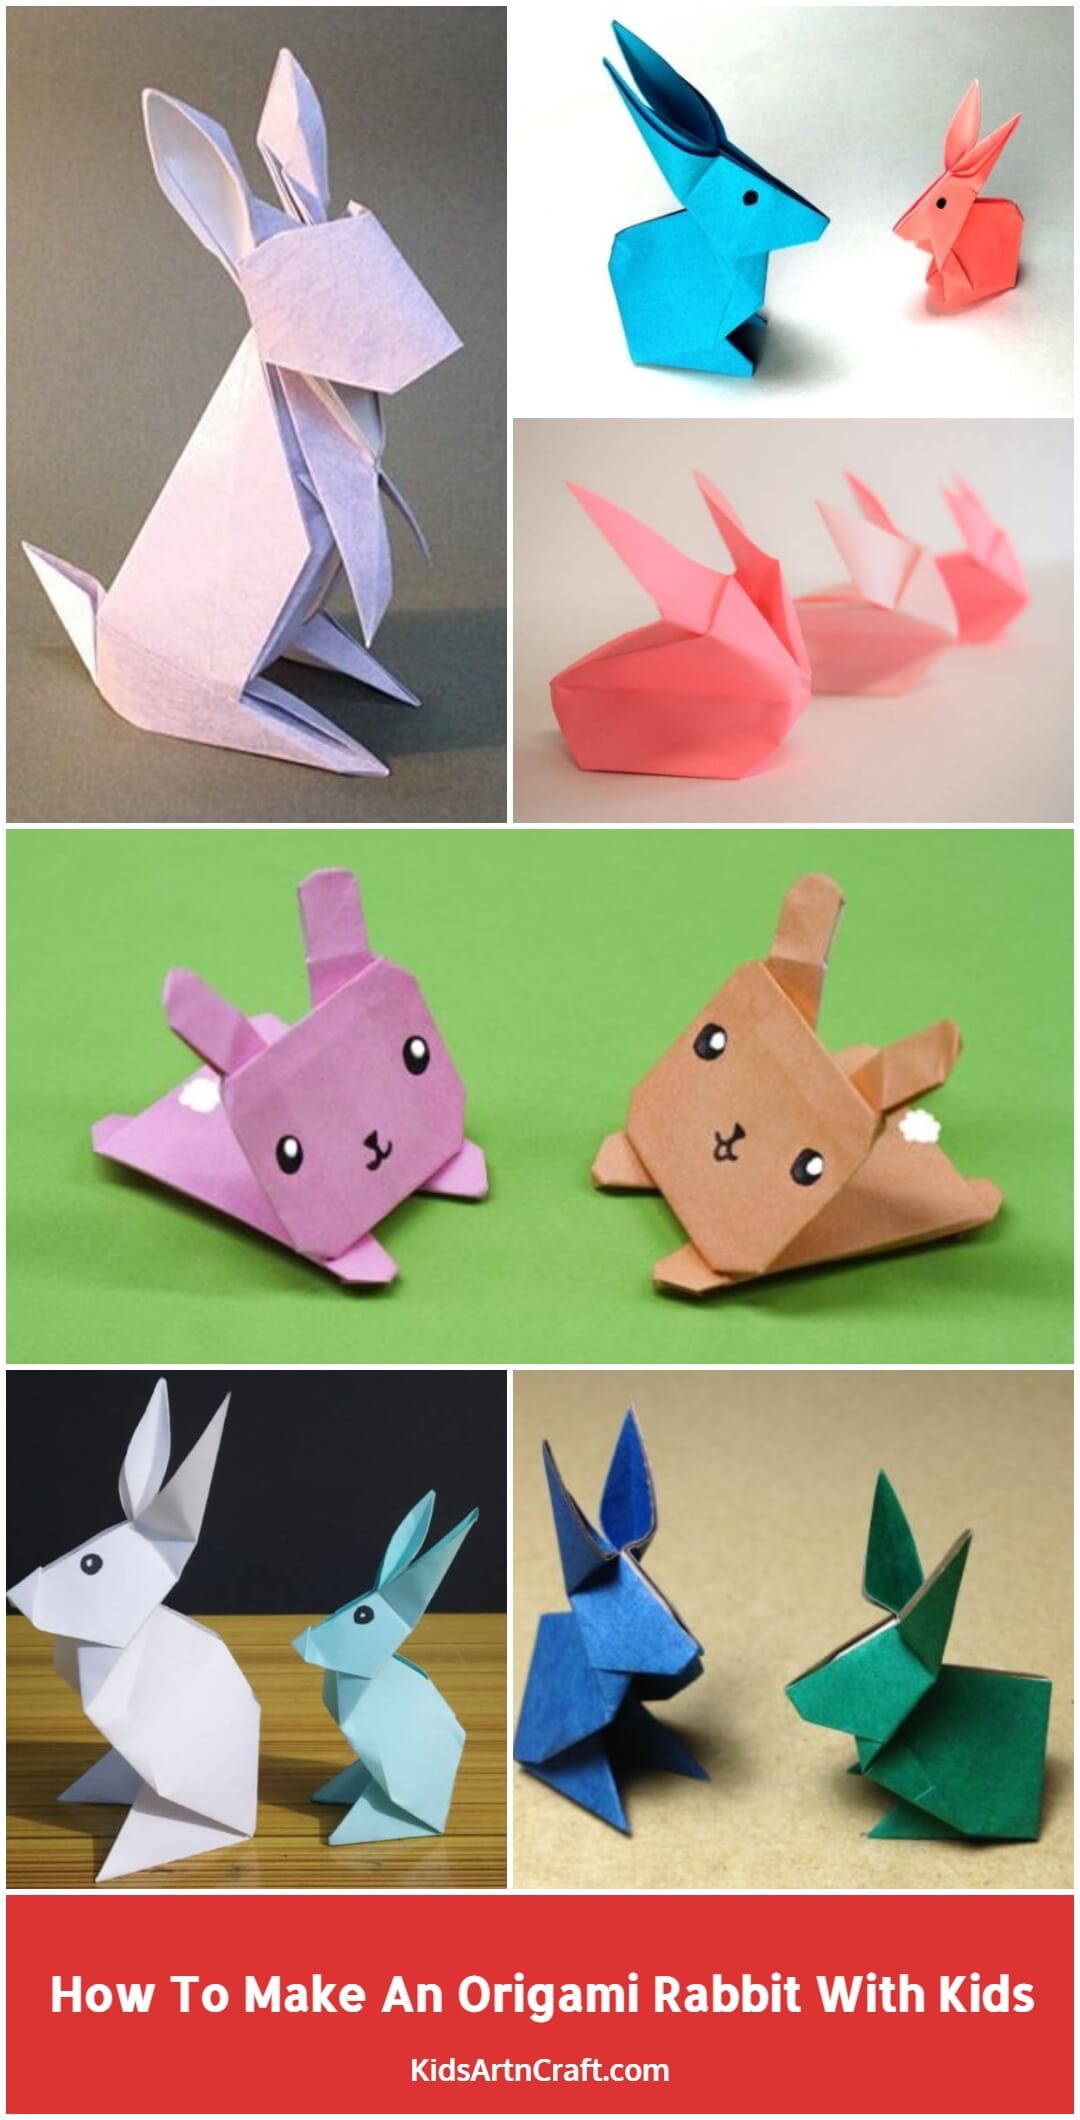 How To Make An Origami Rabbit With Kids